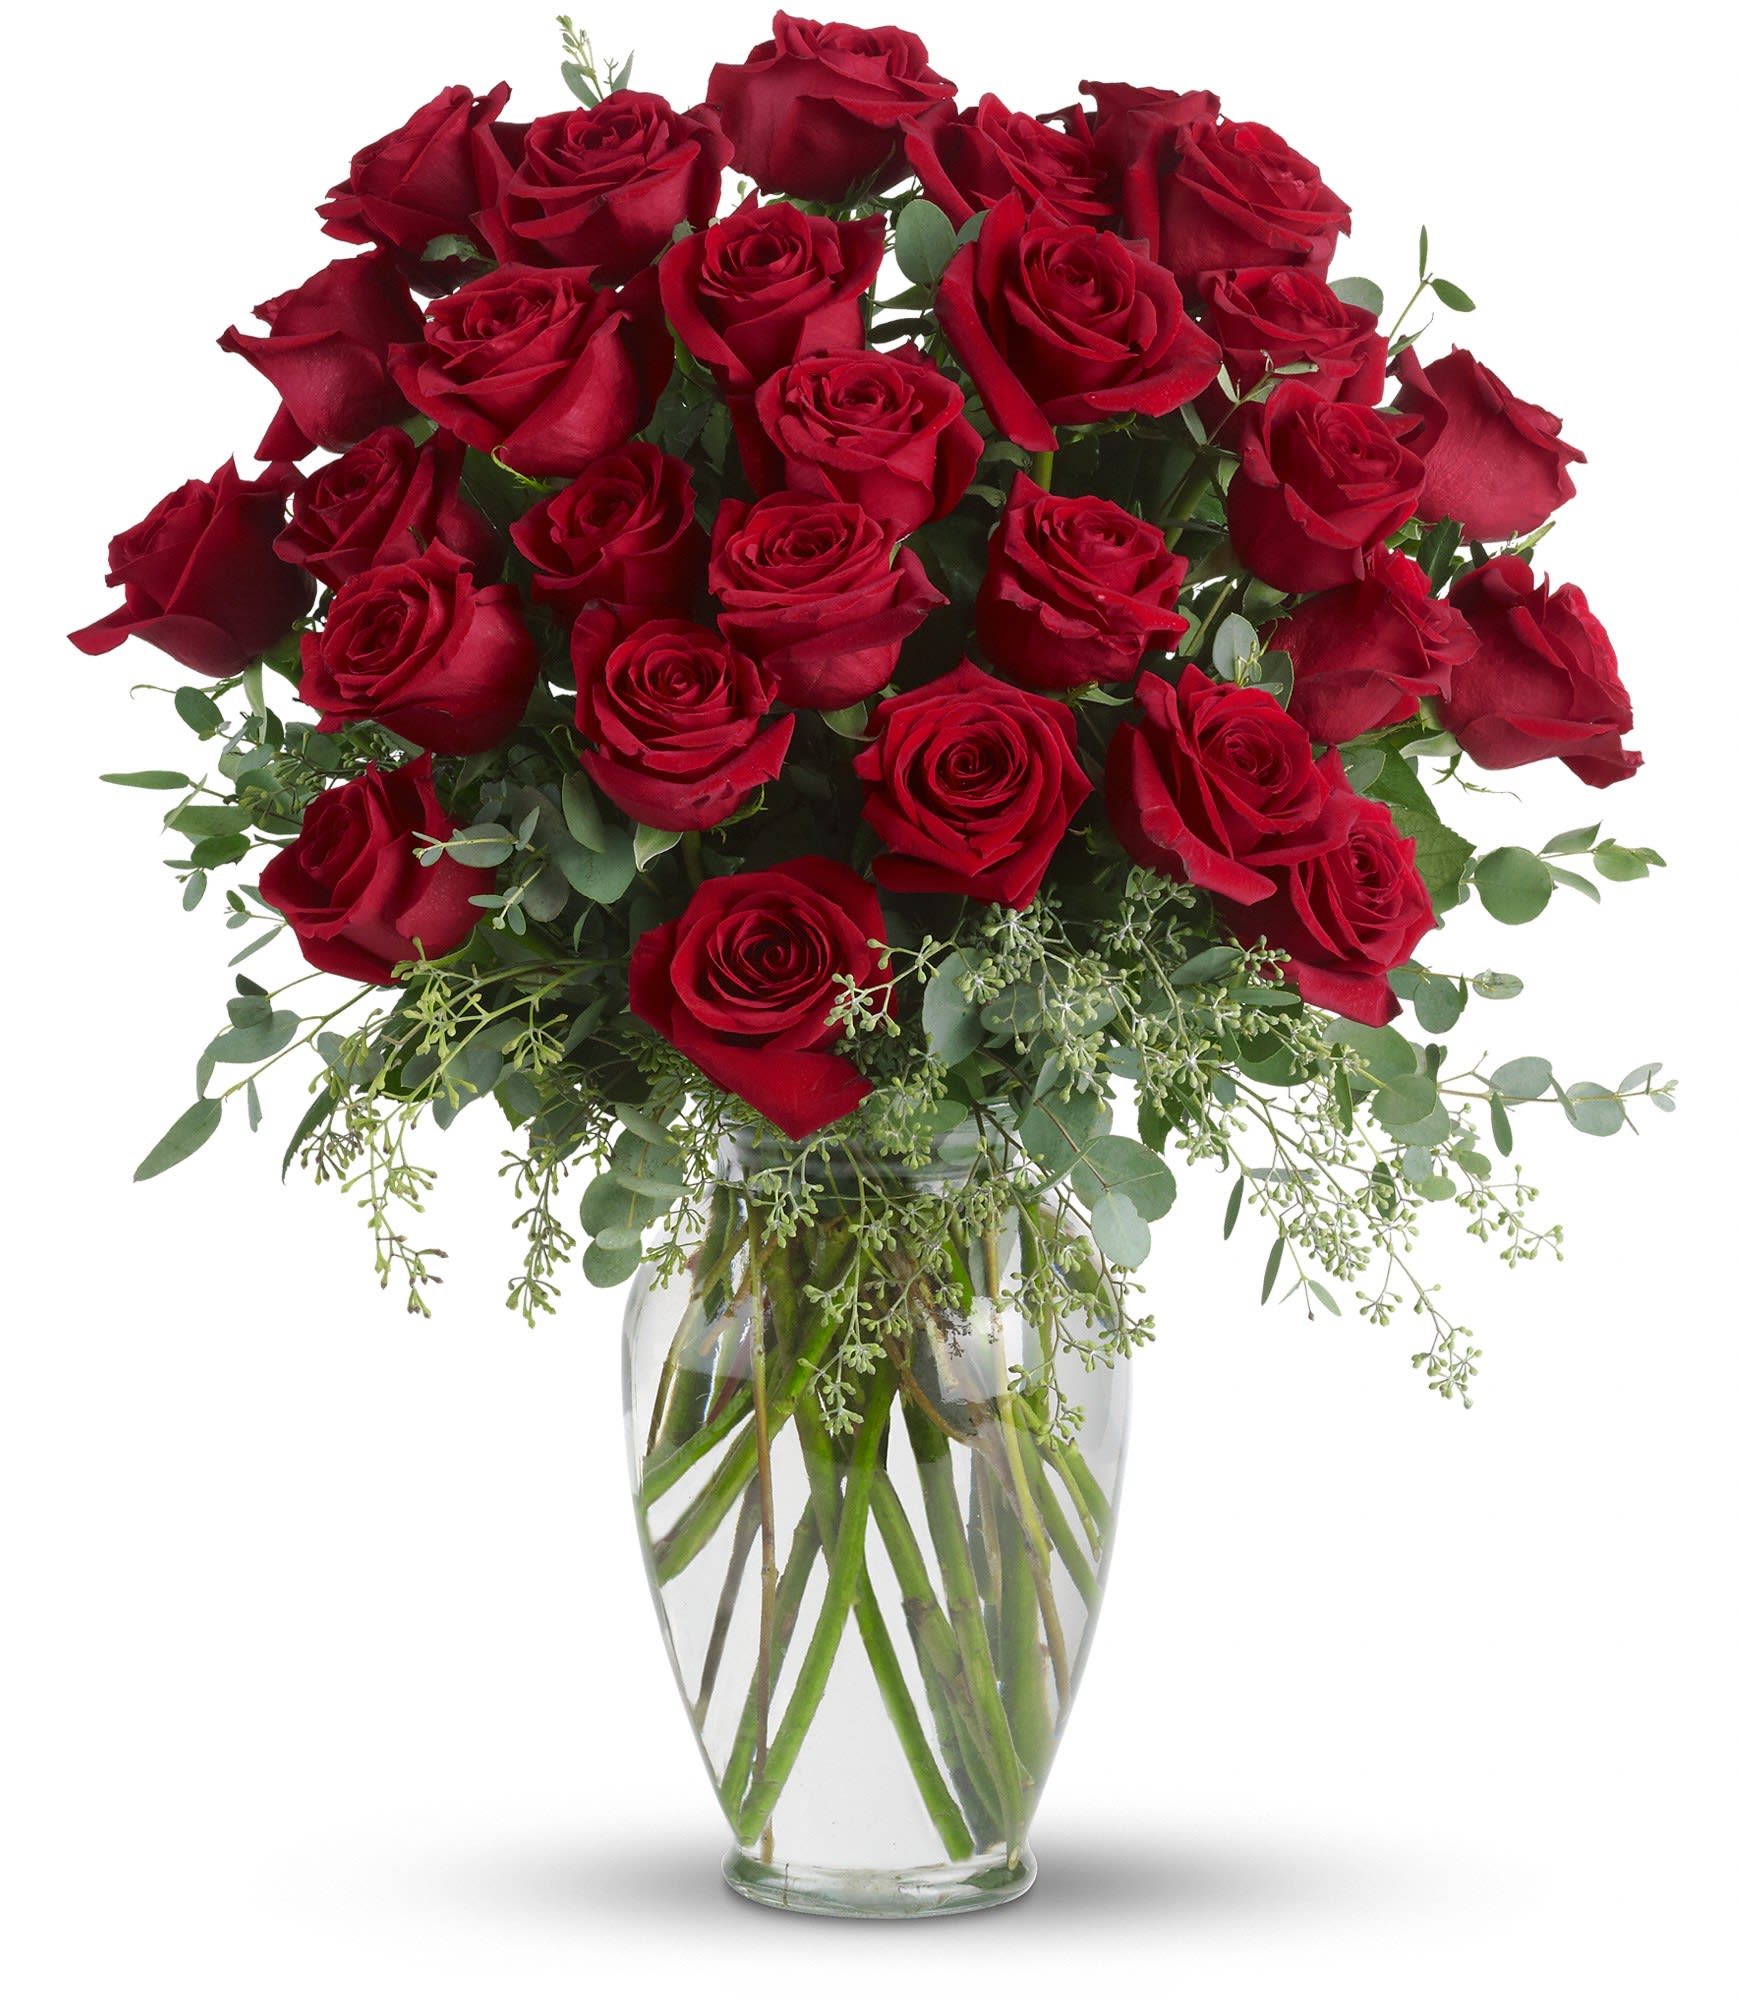 Forever Beloved - 30 Long Stemmed Roses - Forever beloved. Forever in your heart. Forever close to you. That is what this beautiful rose arrangement symbolizes. A shared life. Or a shared sacred moment. All will be dignified beautifully with this loving gift of roses in a classic urn. 